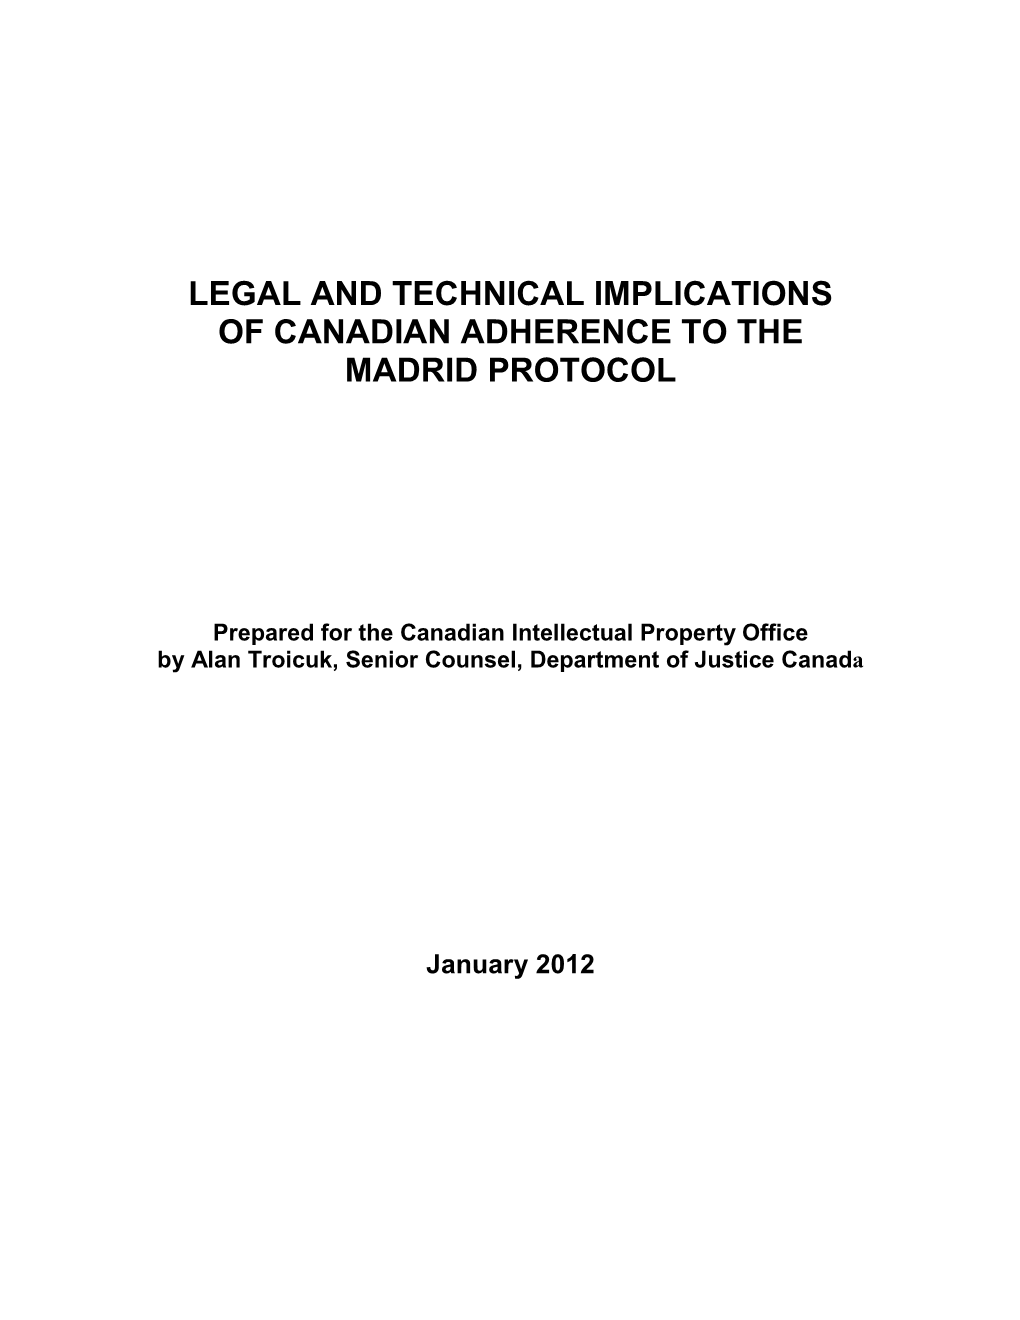 Legal and Technical Implications of Canadian Adherence to the Madrid Protocol